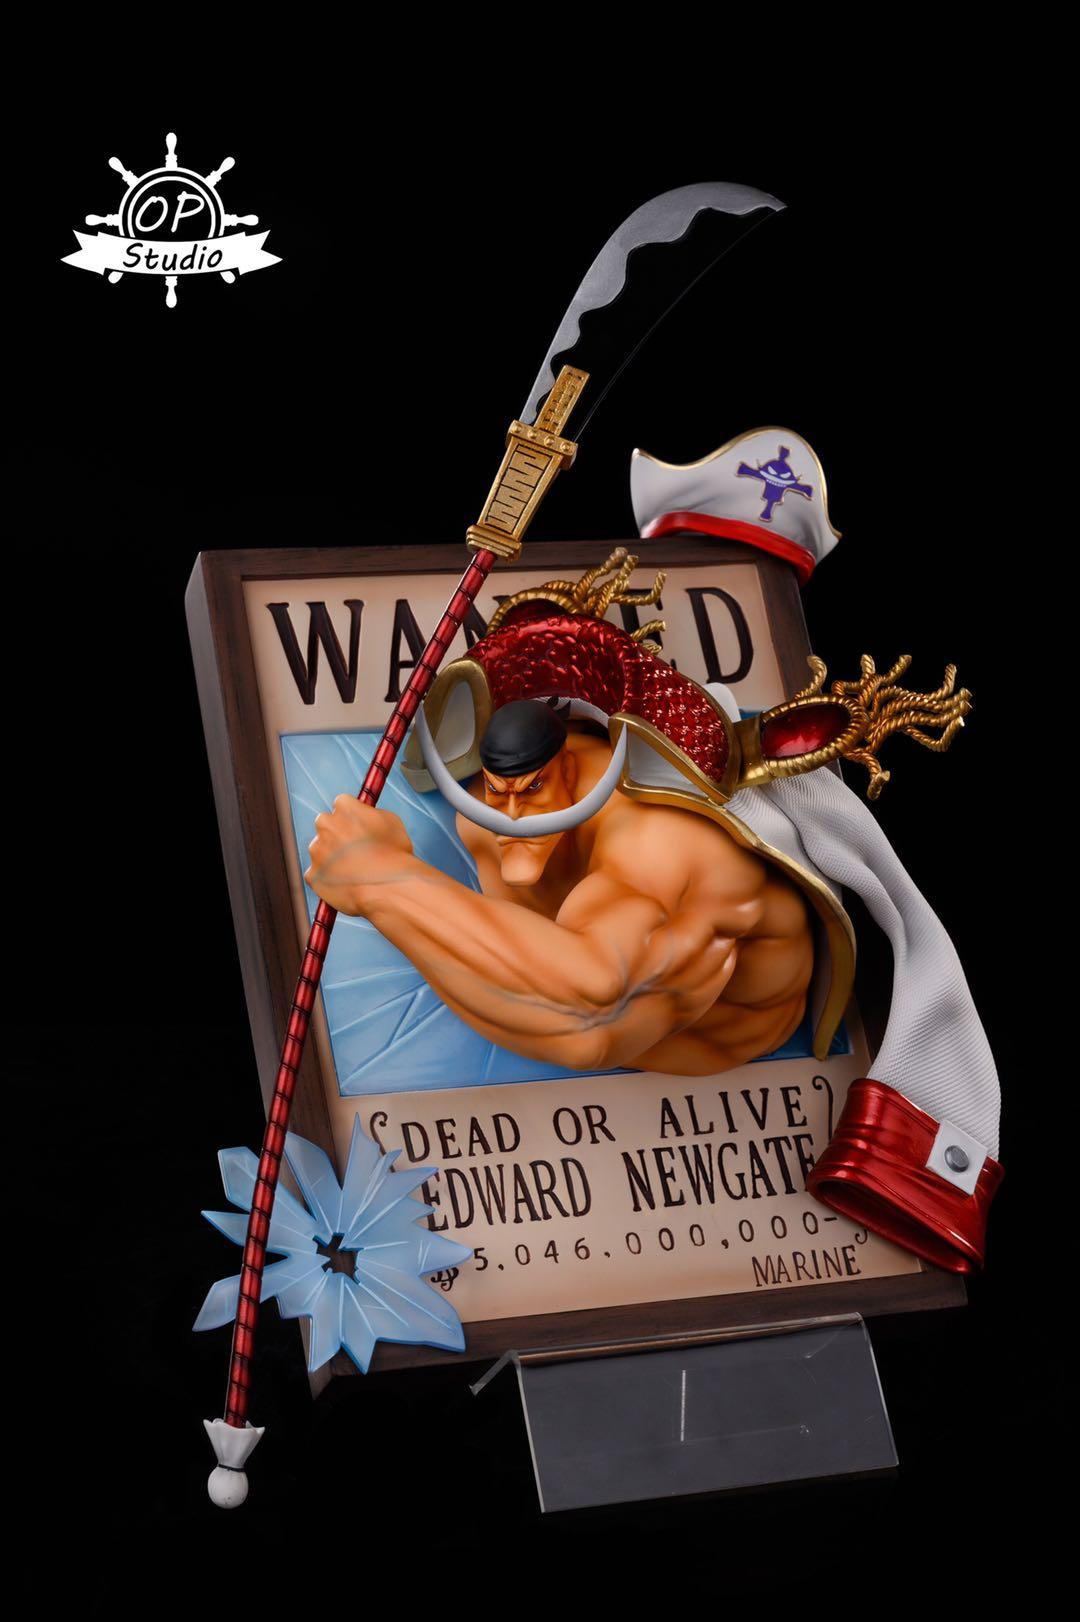 3d Wanted Frame Edward Newgate Marco One Piece Resin Statue Op S Favorgk